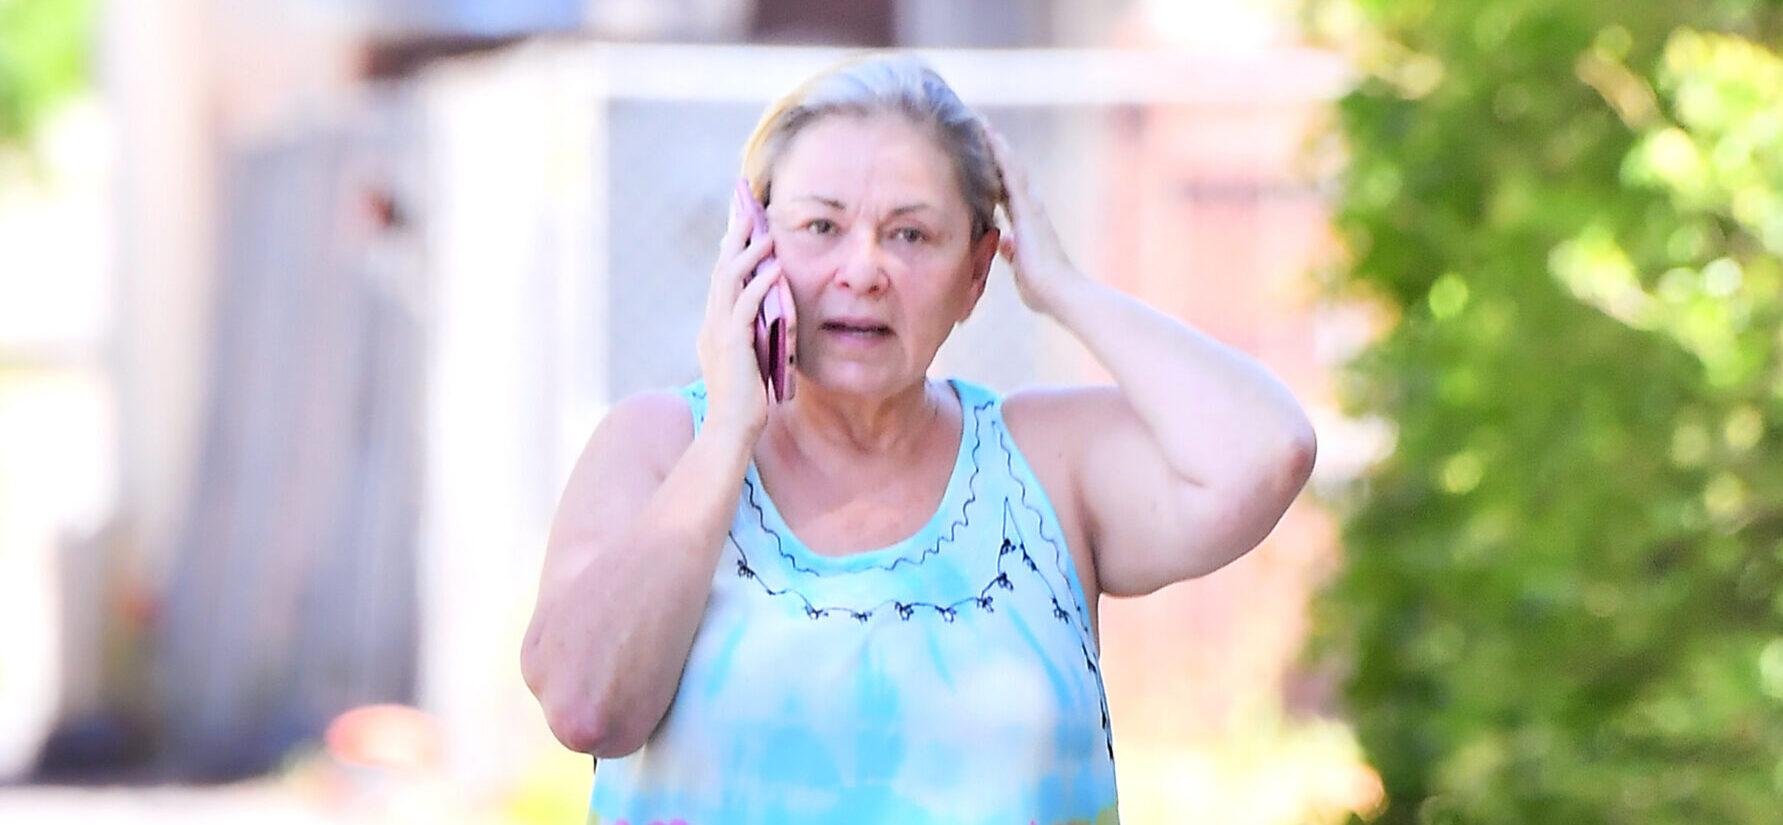 Roseanne Barr spotted looking anguished and crying while talking on the phone in a back alley near her home in Salt Lake City UT